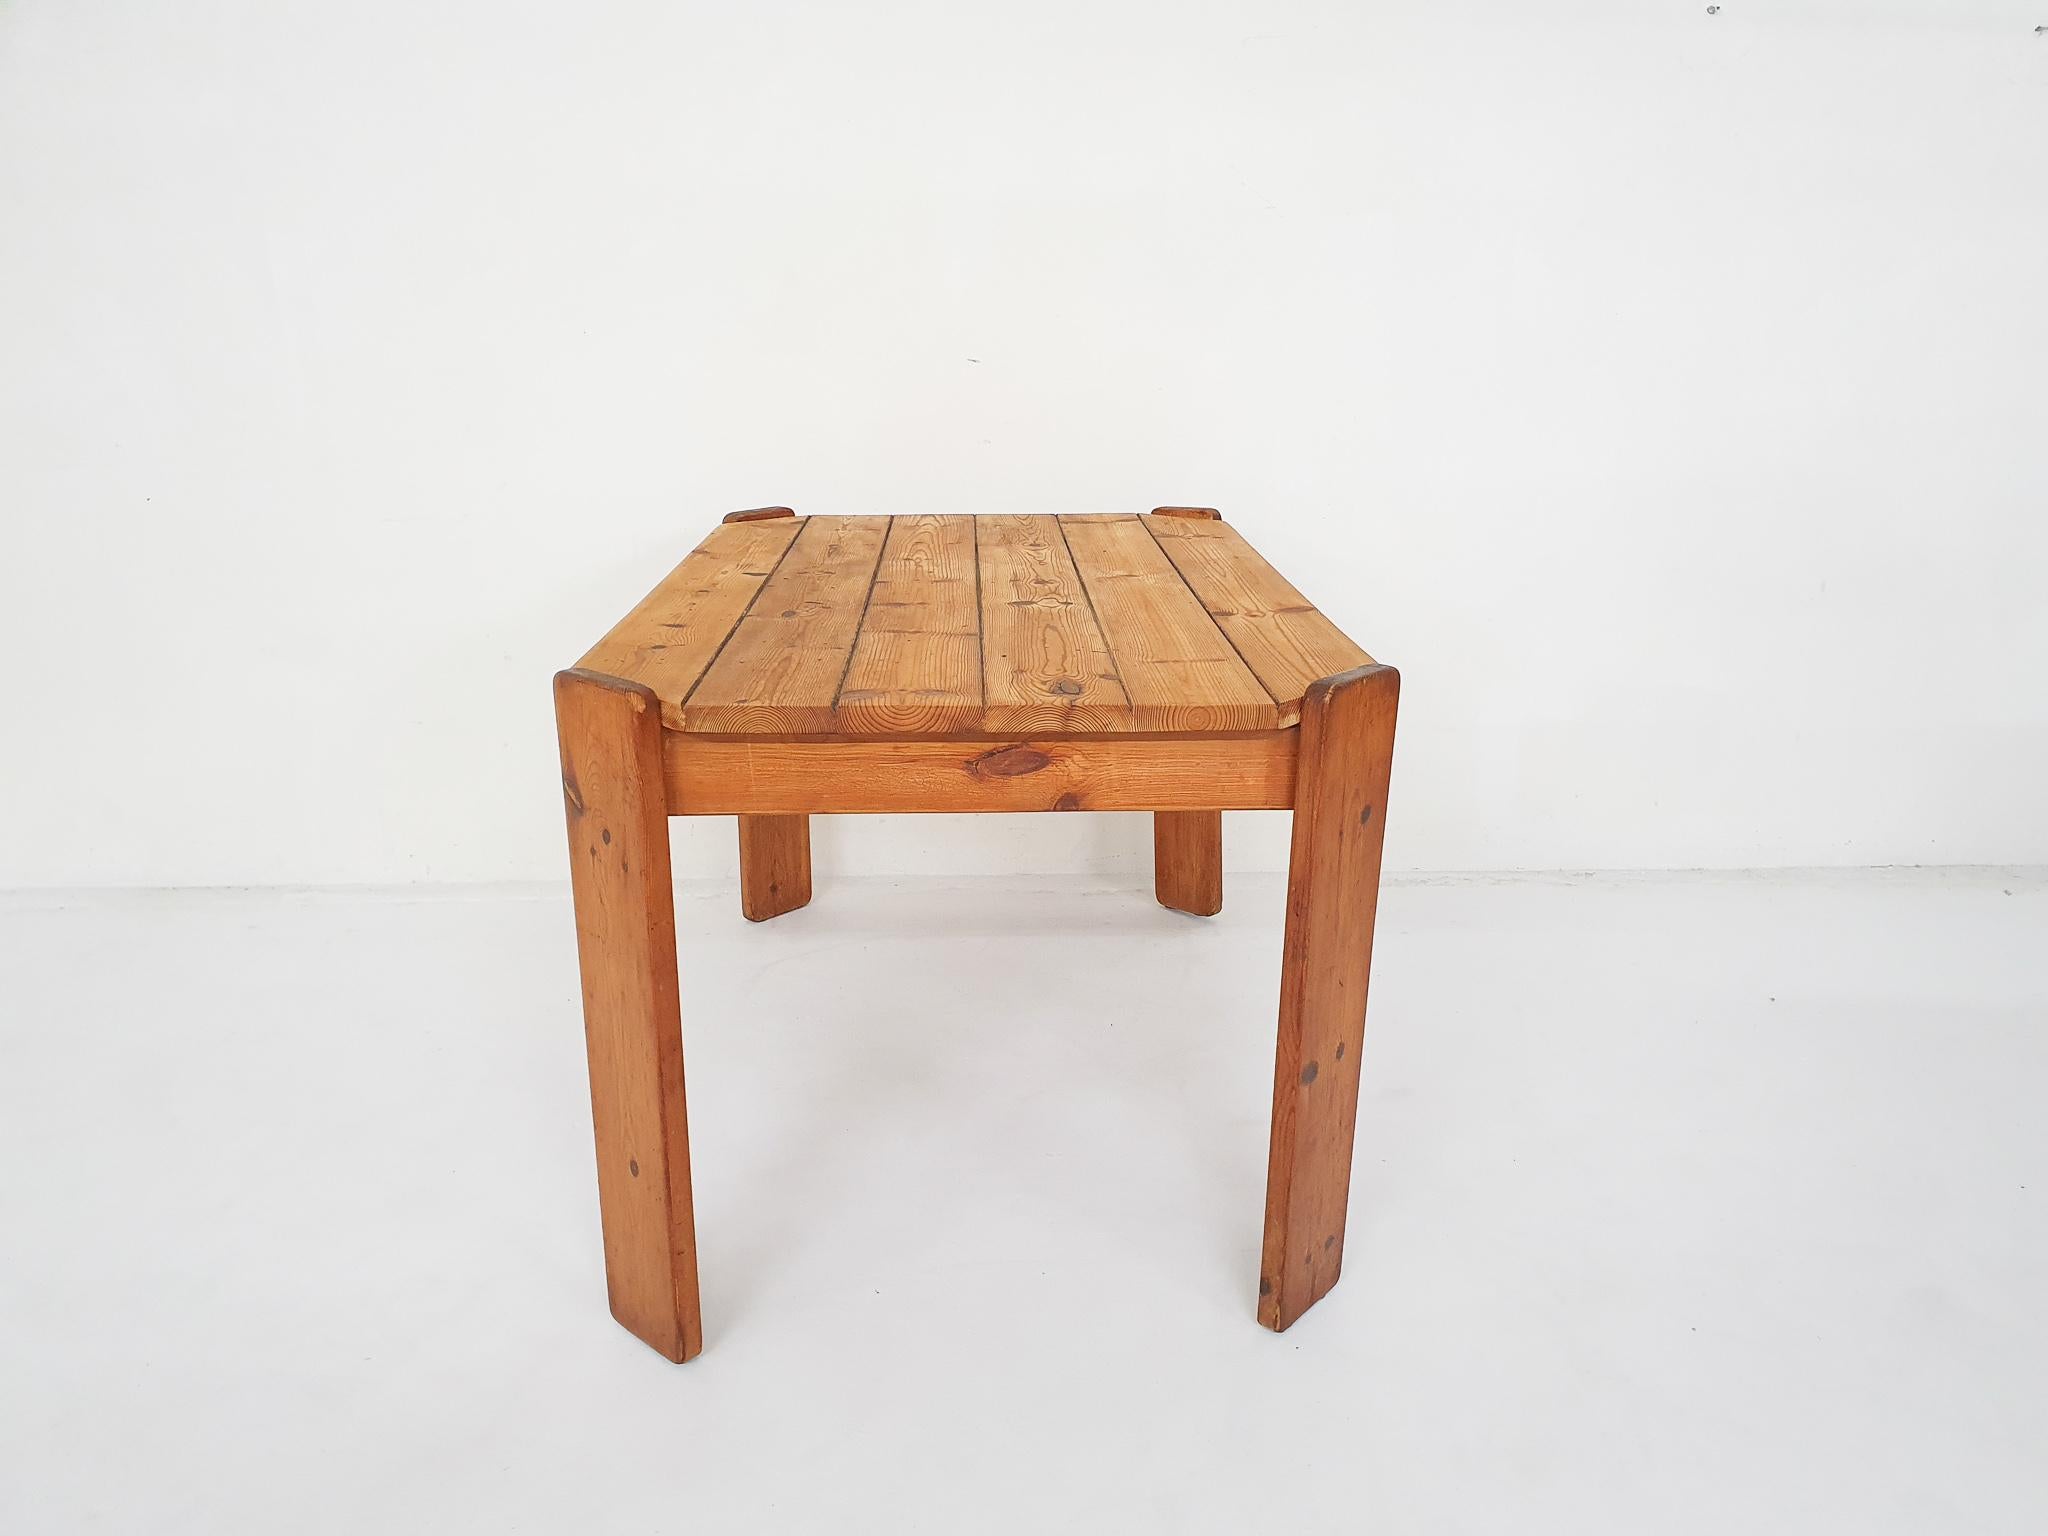 Dutch Pinewood dining table attrb. to Ate van Apeldoorn, The Netherlands 1970's For Sale